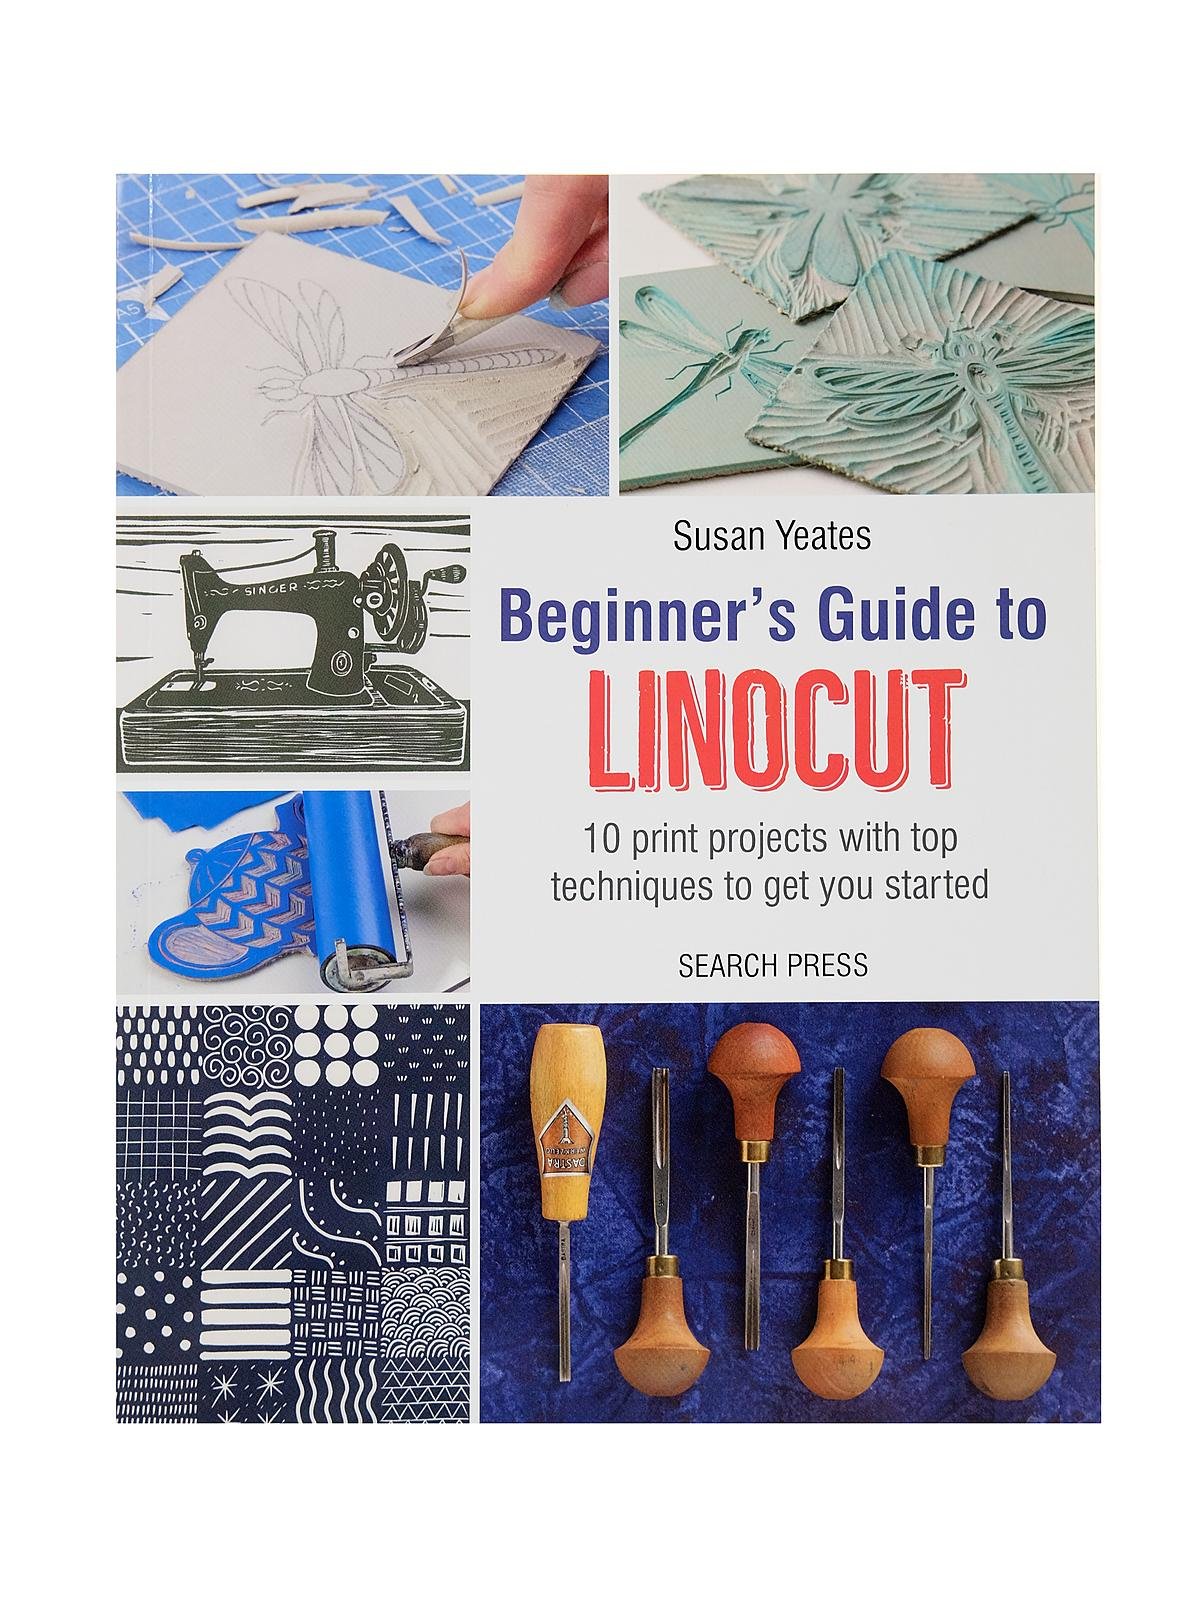 Search Press - Beginner's Guide to Linocut